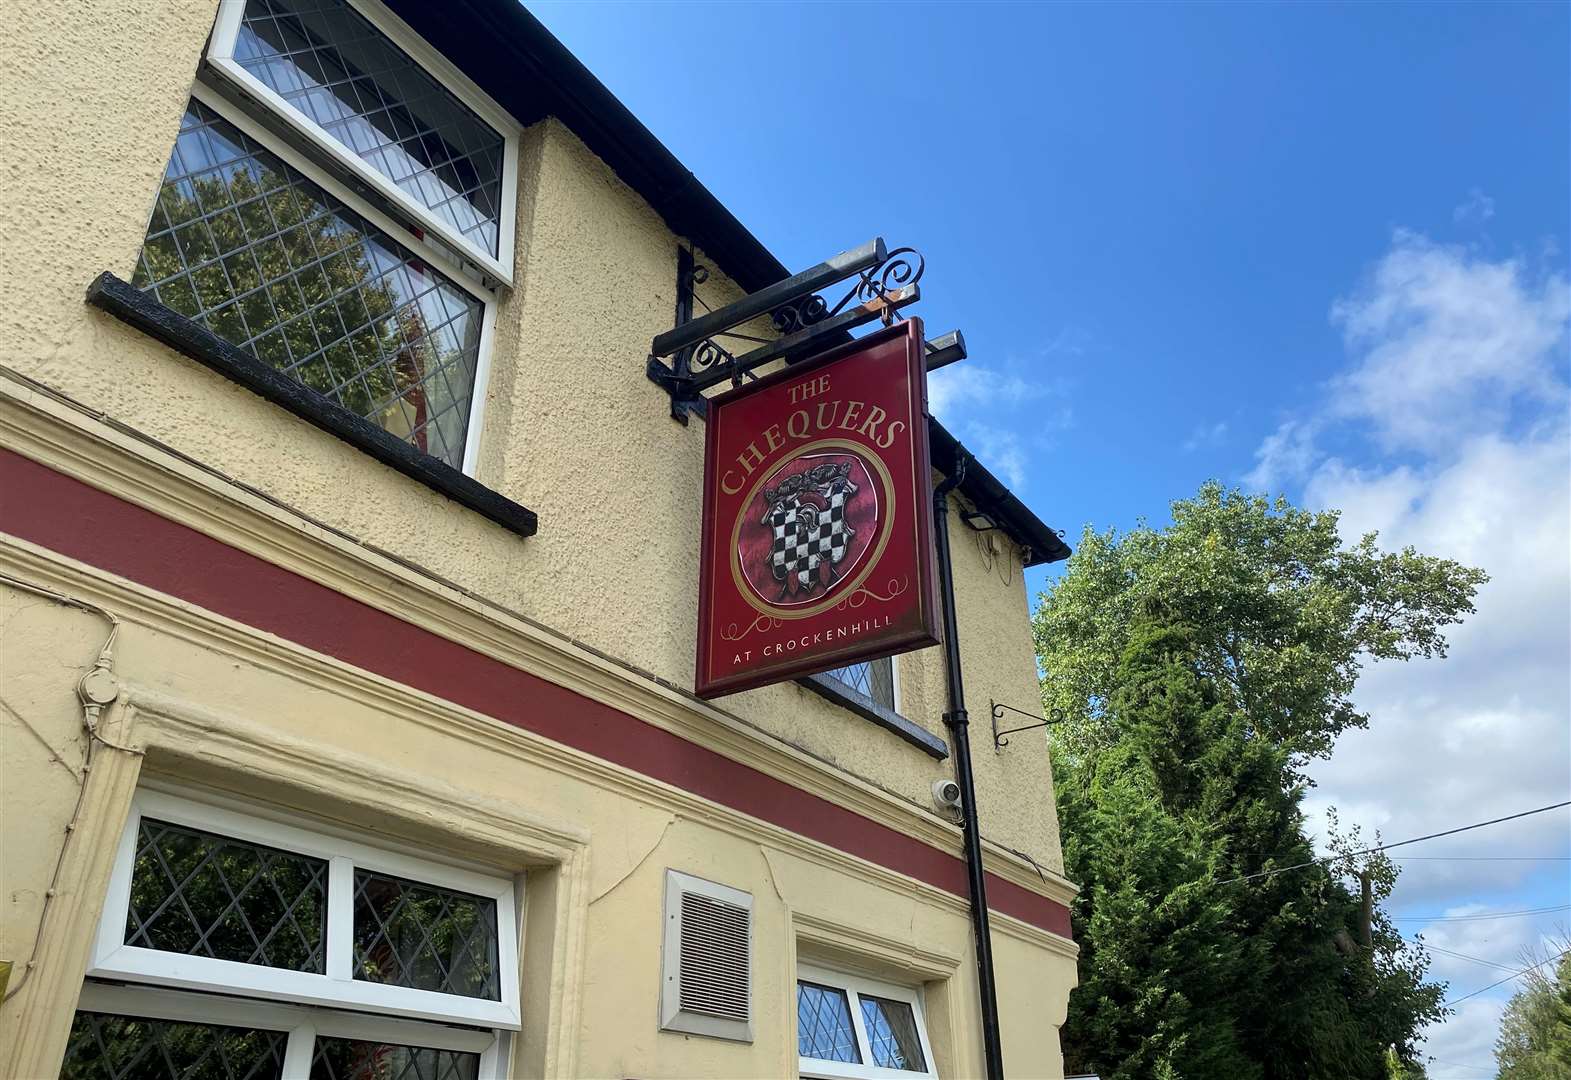 The Chequers is set to be taken over by another landlady